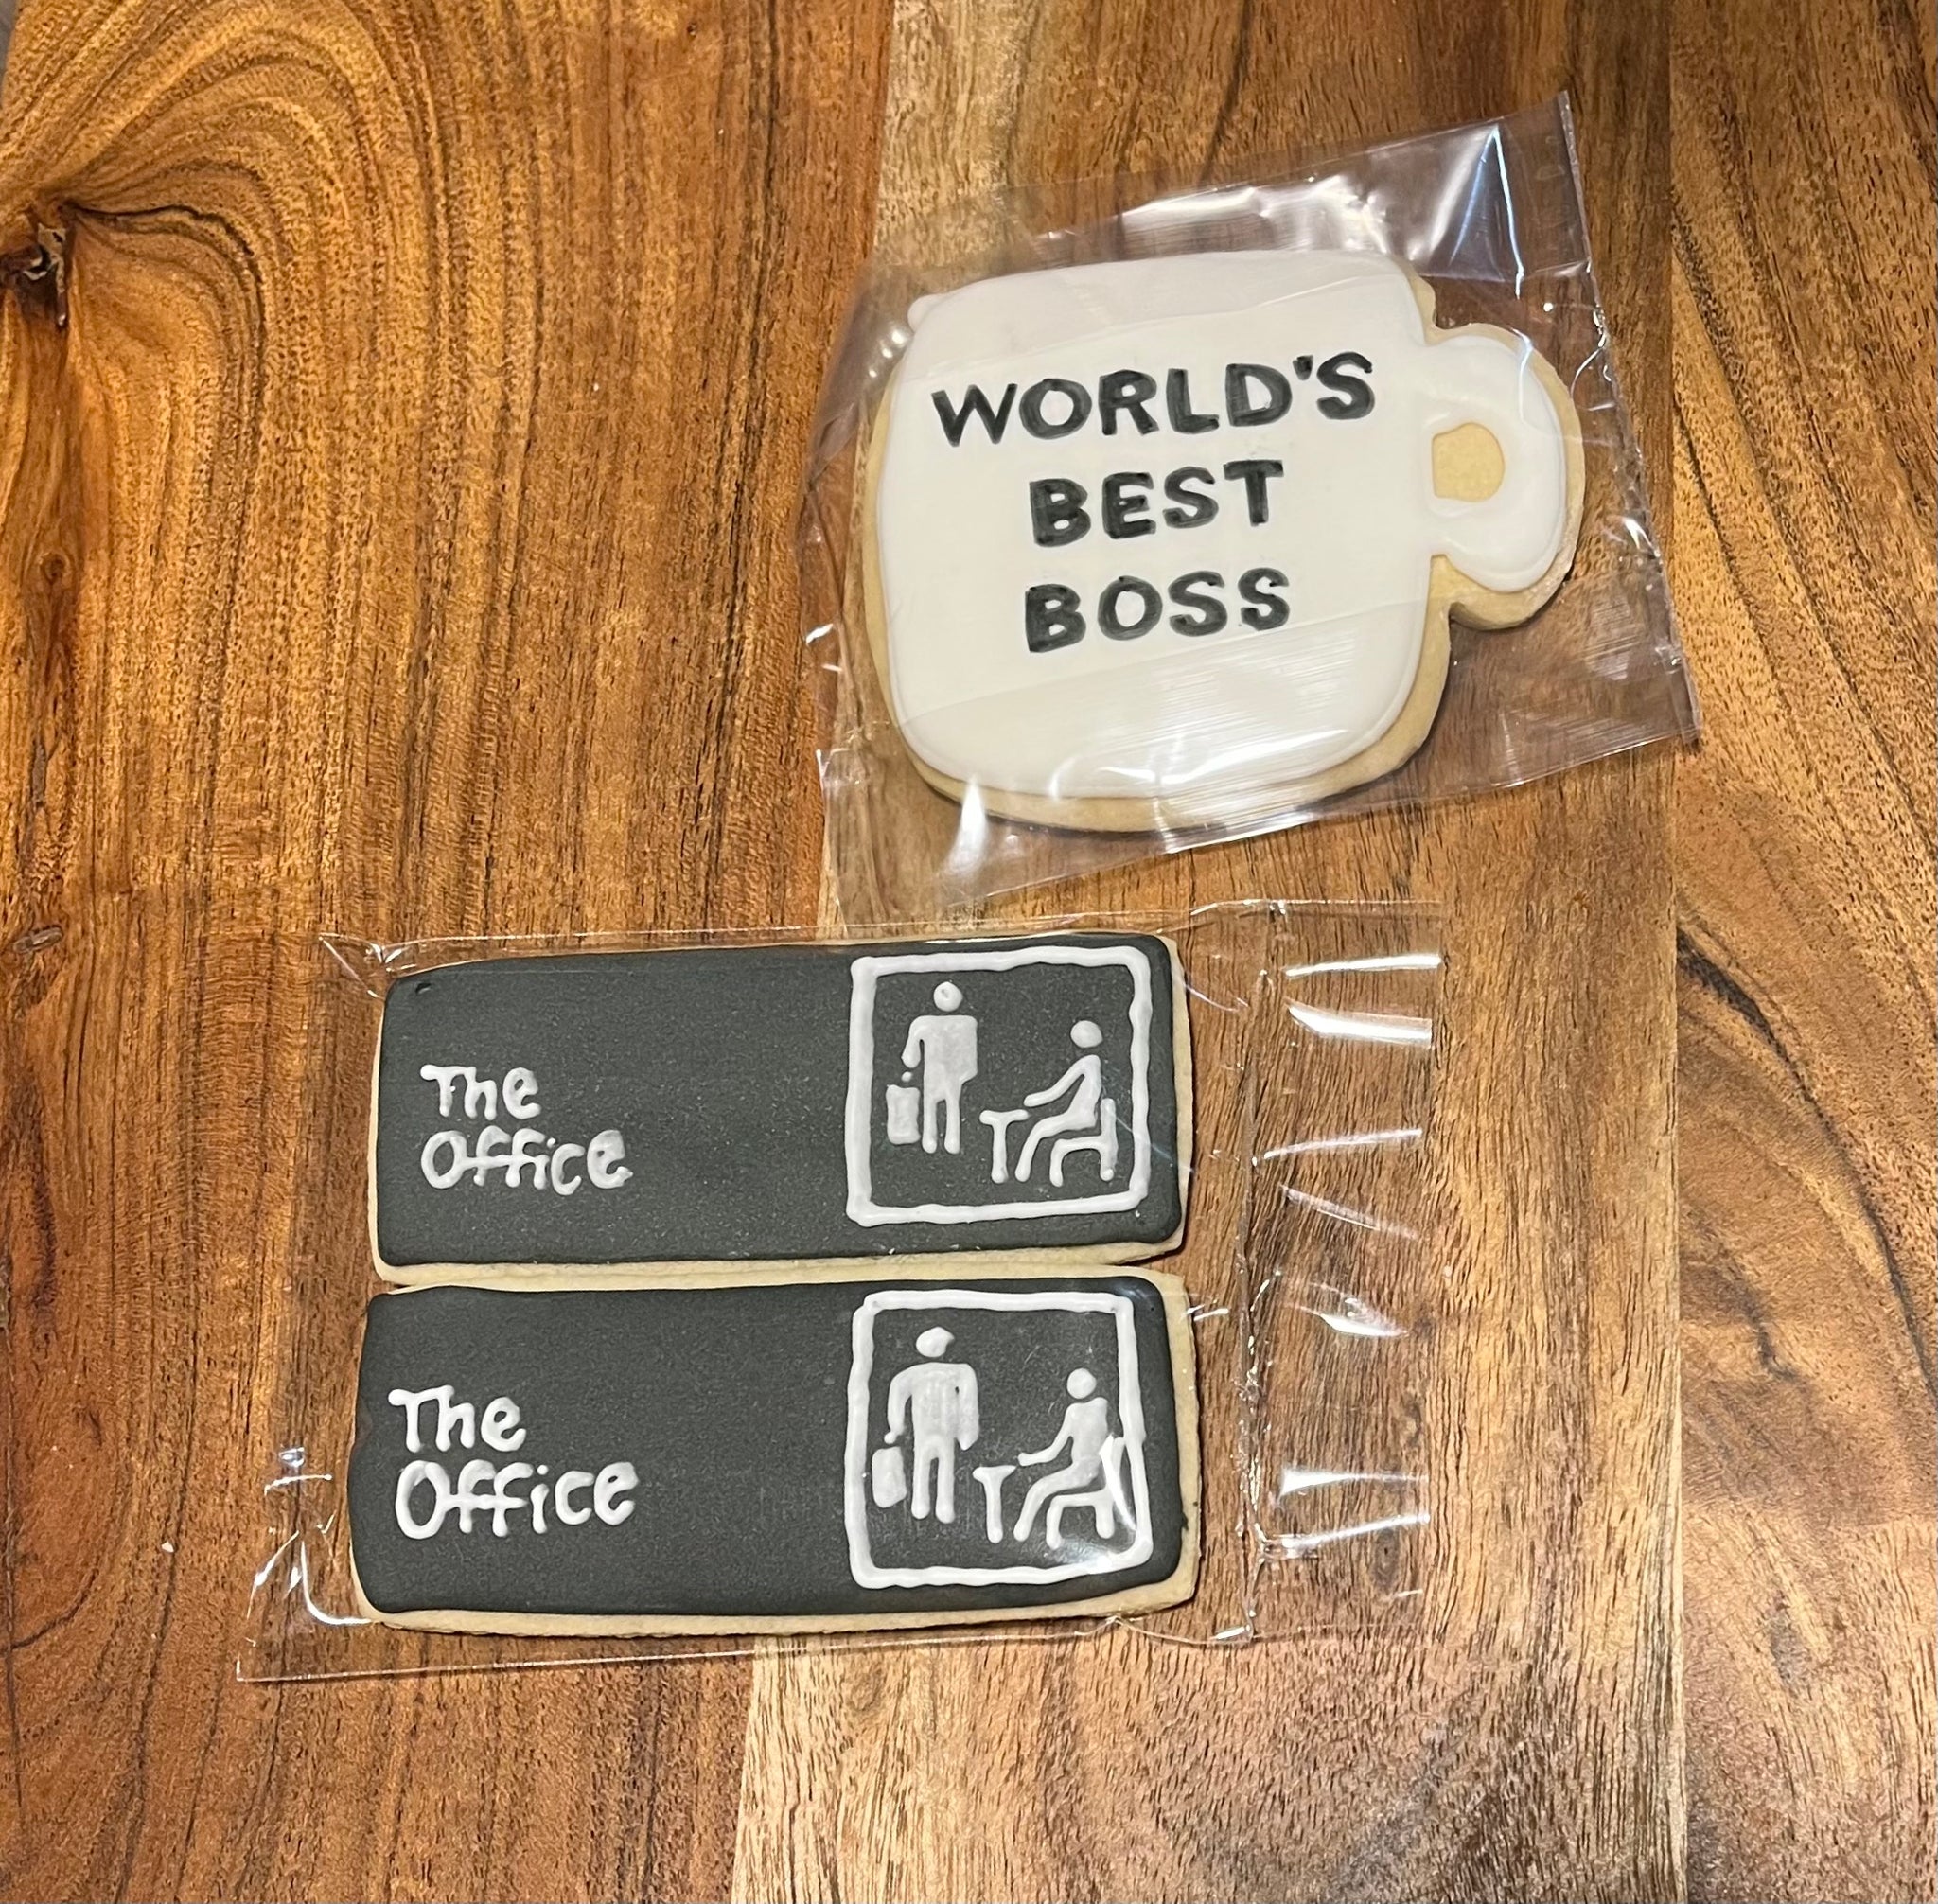 The Office (2-pack)